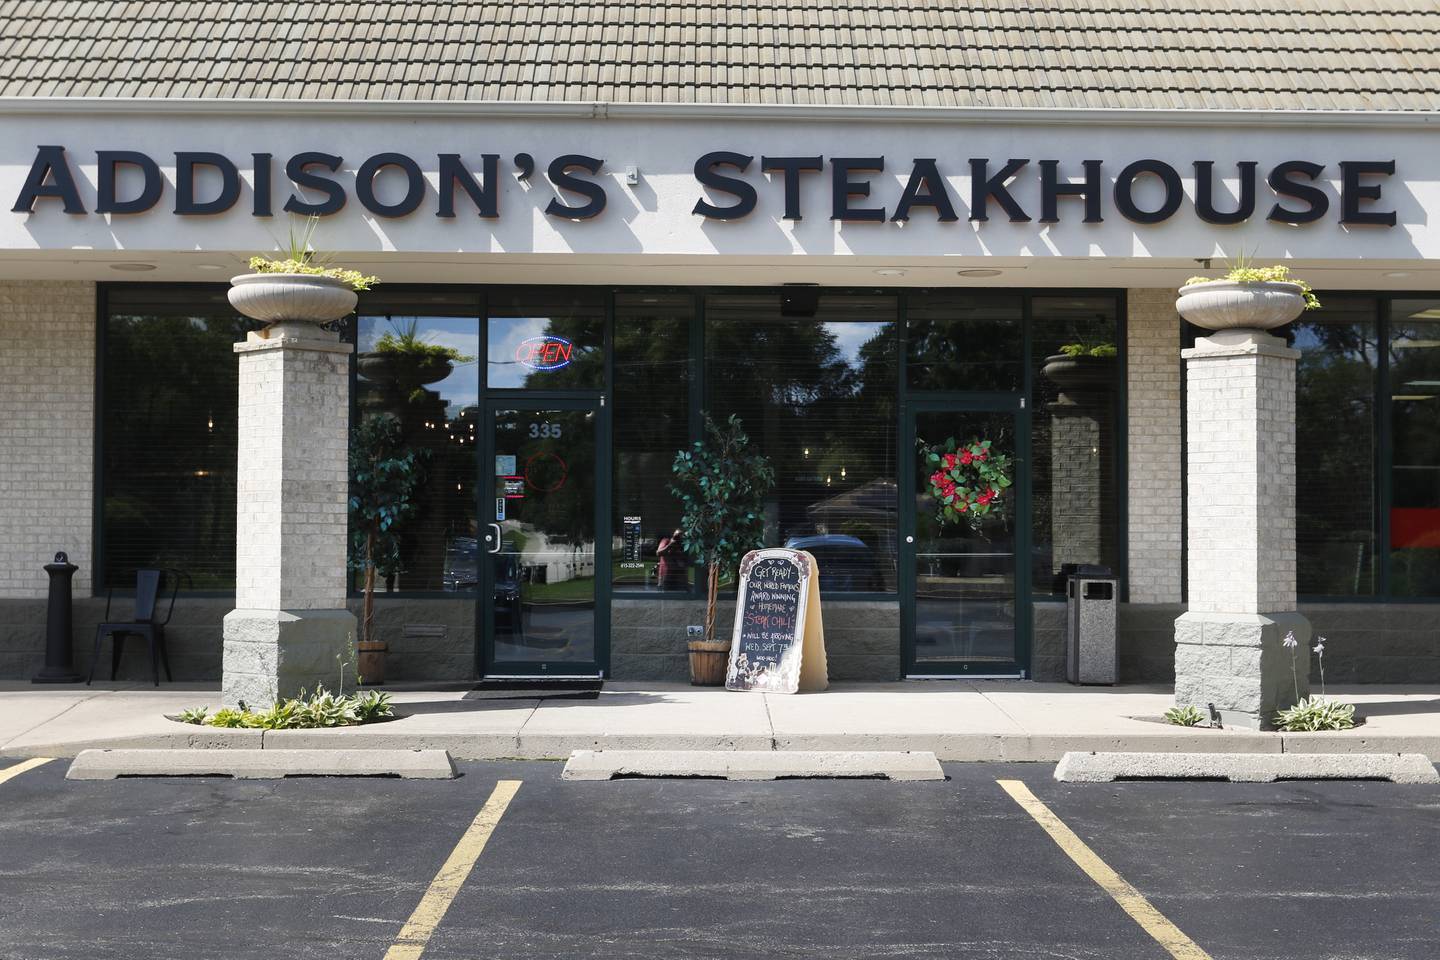 Addison's Steakhouse, 335 Front St. in McHenry, on Thursday, Sept. 7, 2022. Some area restaurants are still struggling to find staff.